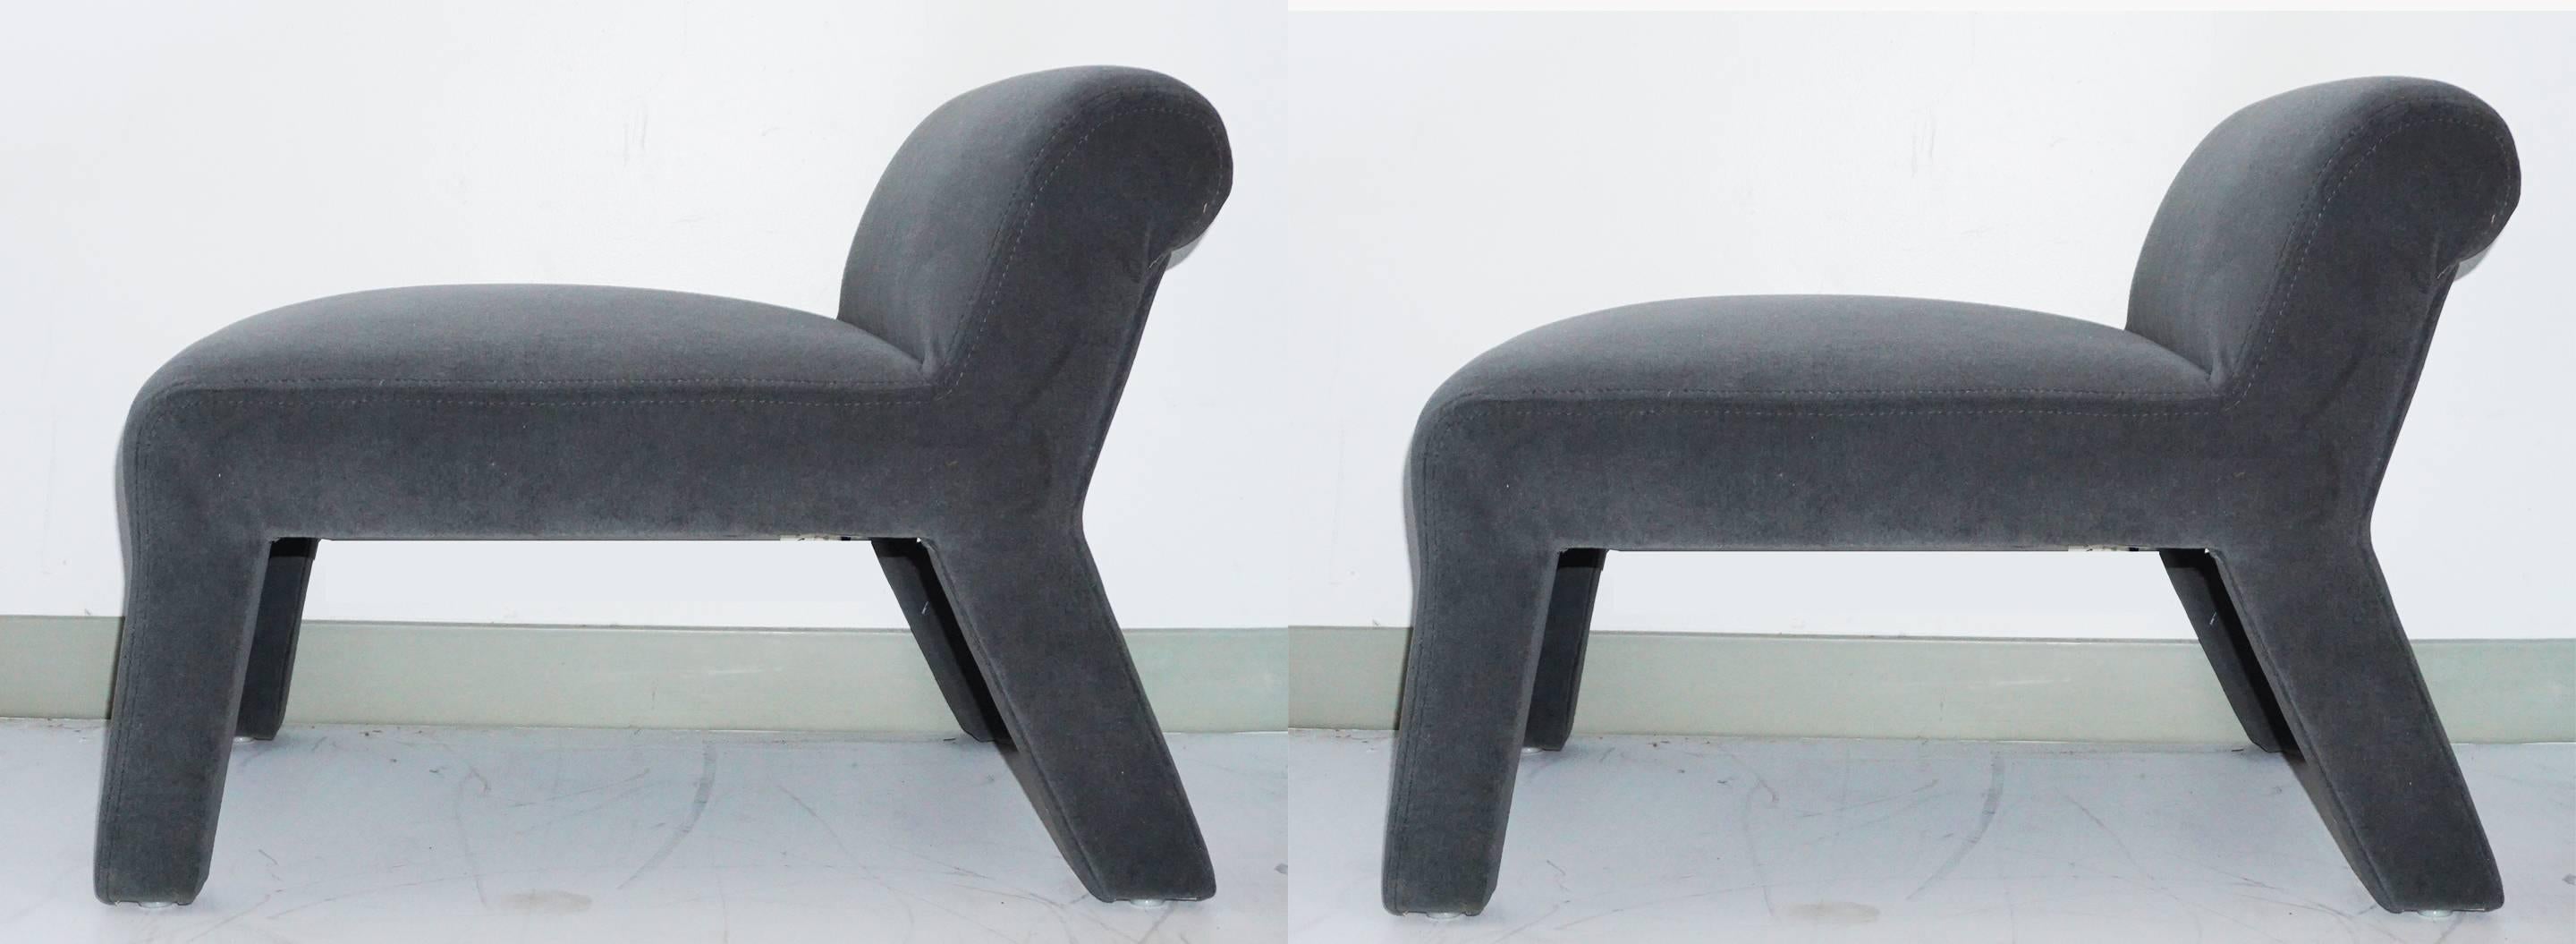 Palm Springs designer Gary Jon's interpretation of the Billy Haines Elbow chair.

Recovered in gray mohair.

It is a small-scale slipper chair which allows a woman in a ball gown to sit sideways.
 